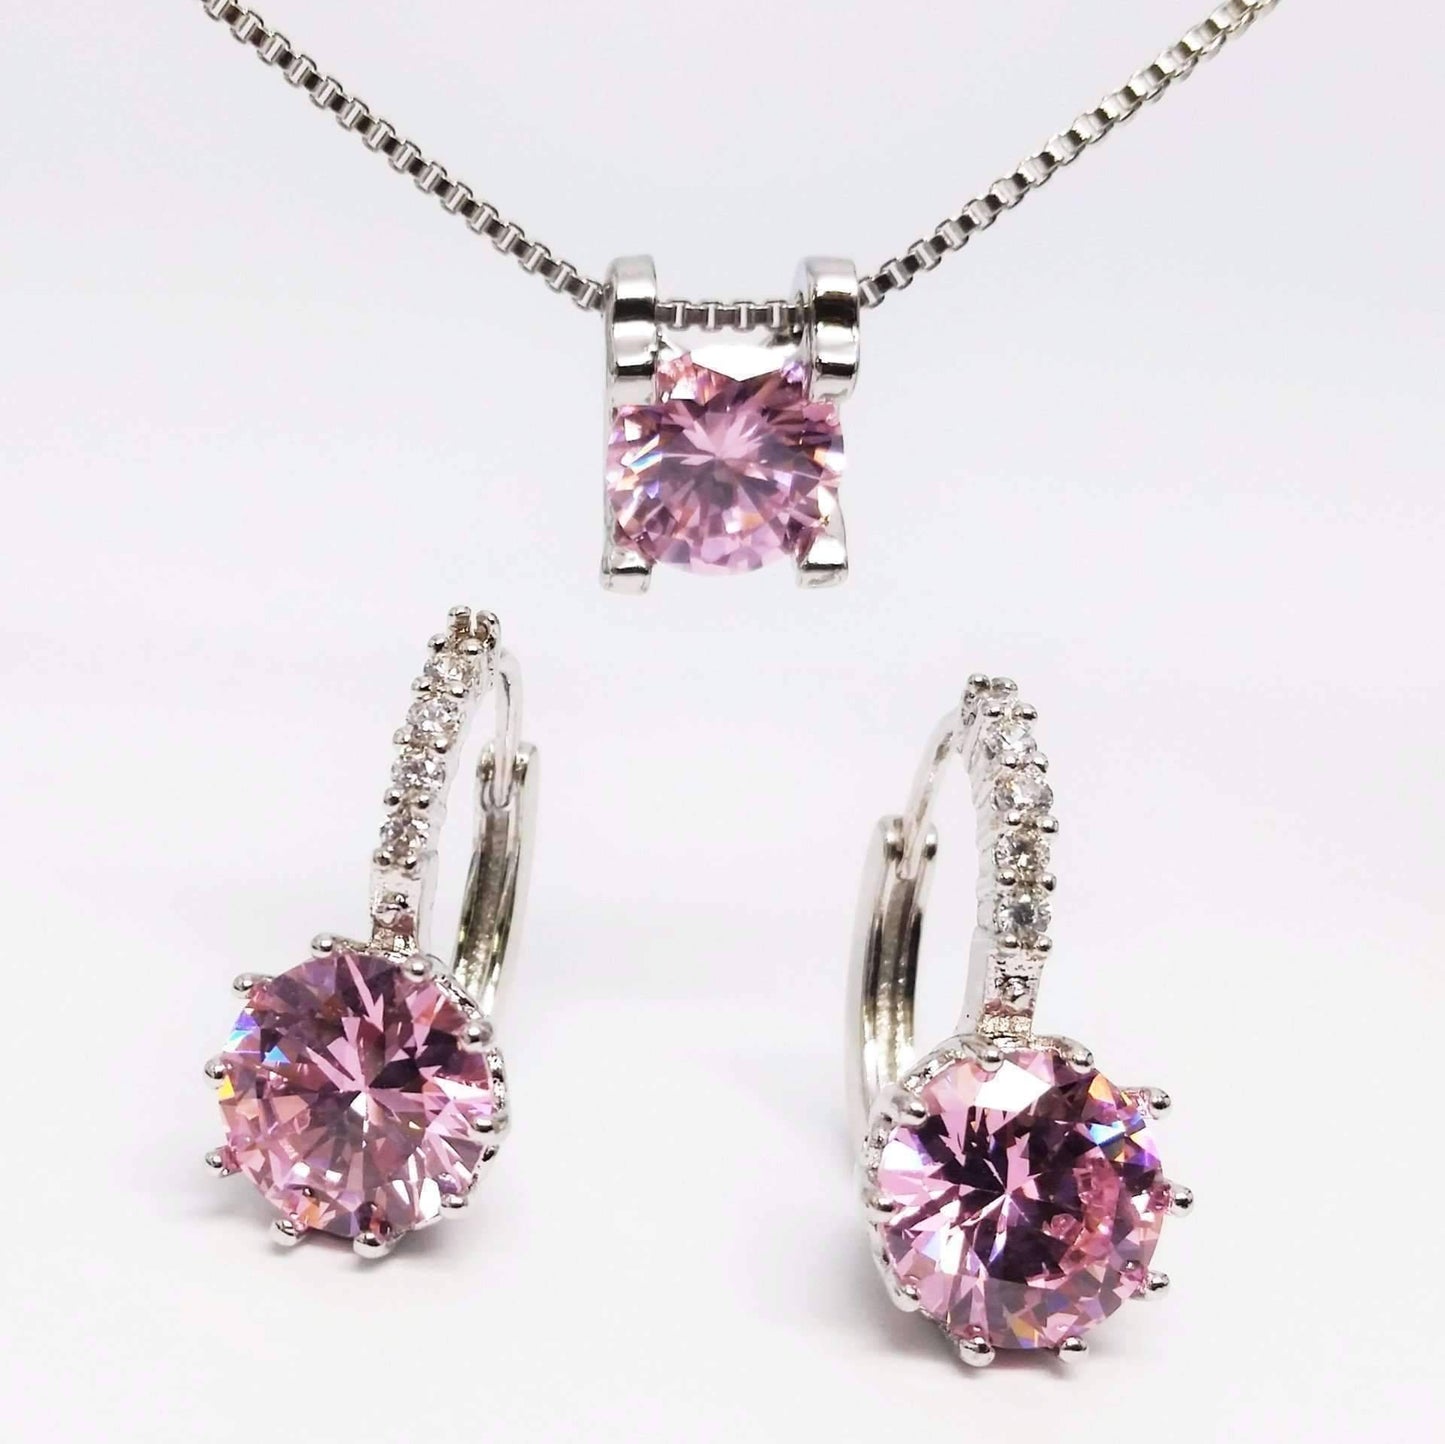 Feshionn IOBI Sets Blushing Pink ON SALE - Elena Bold Solitaire Necklace and Hoop Earrings Set in Blushing Pink or Diamond White